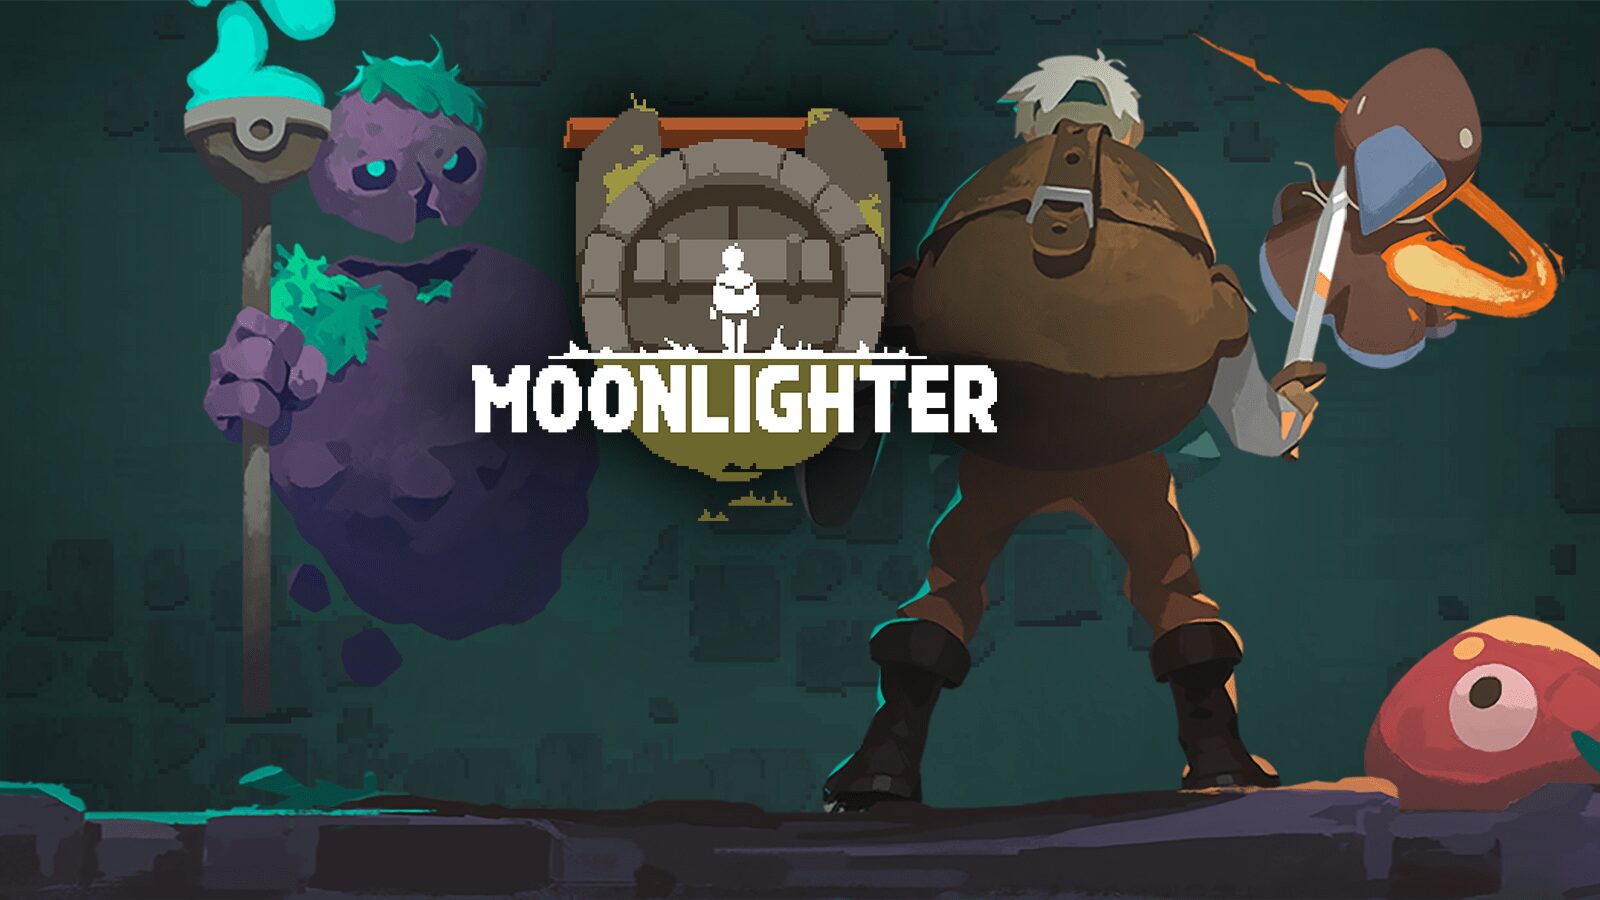 Moonlighter hits the Nintendo Switch today